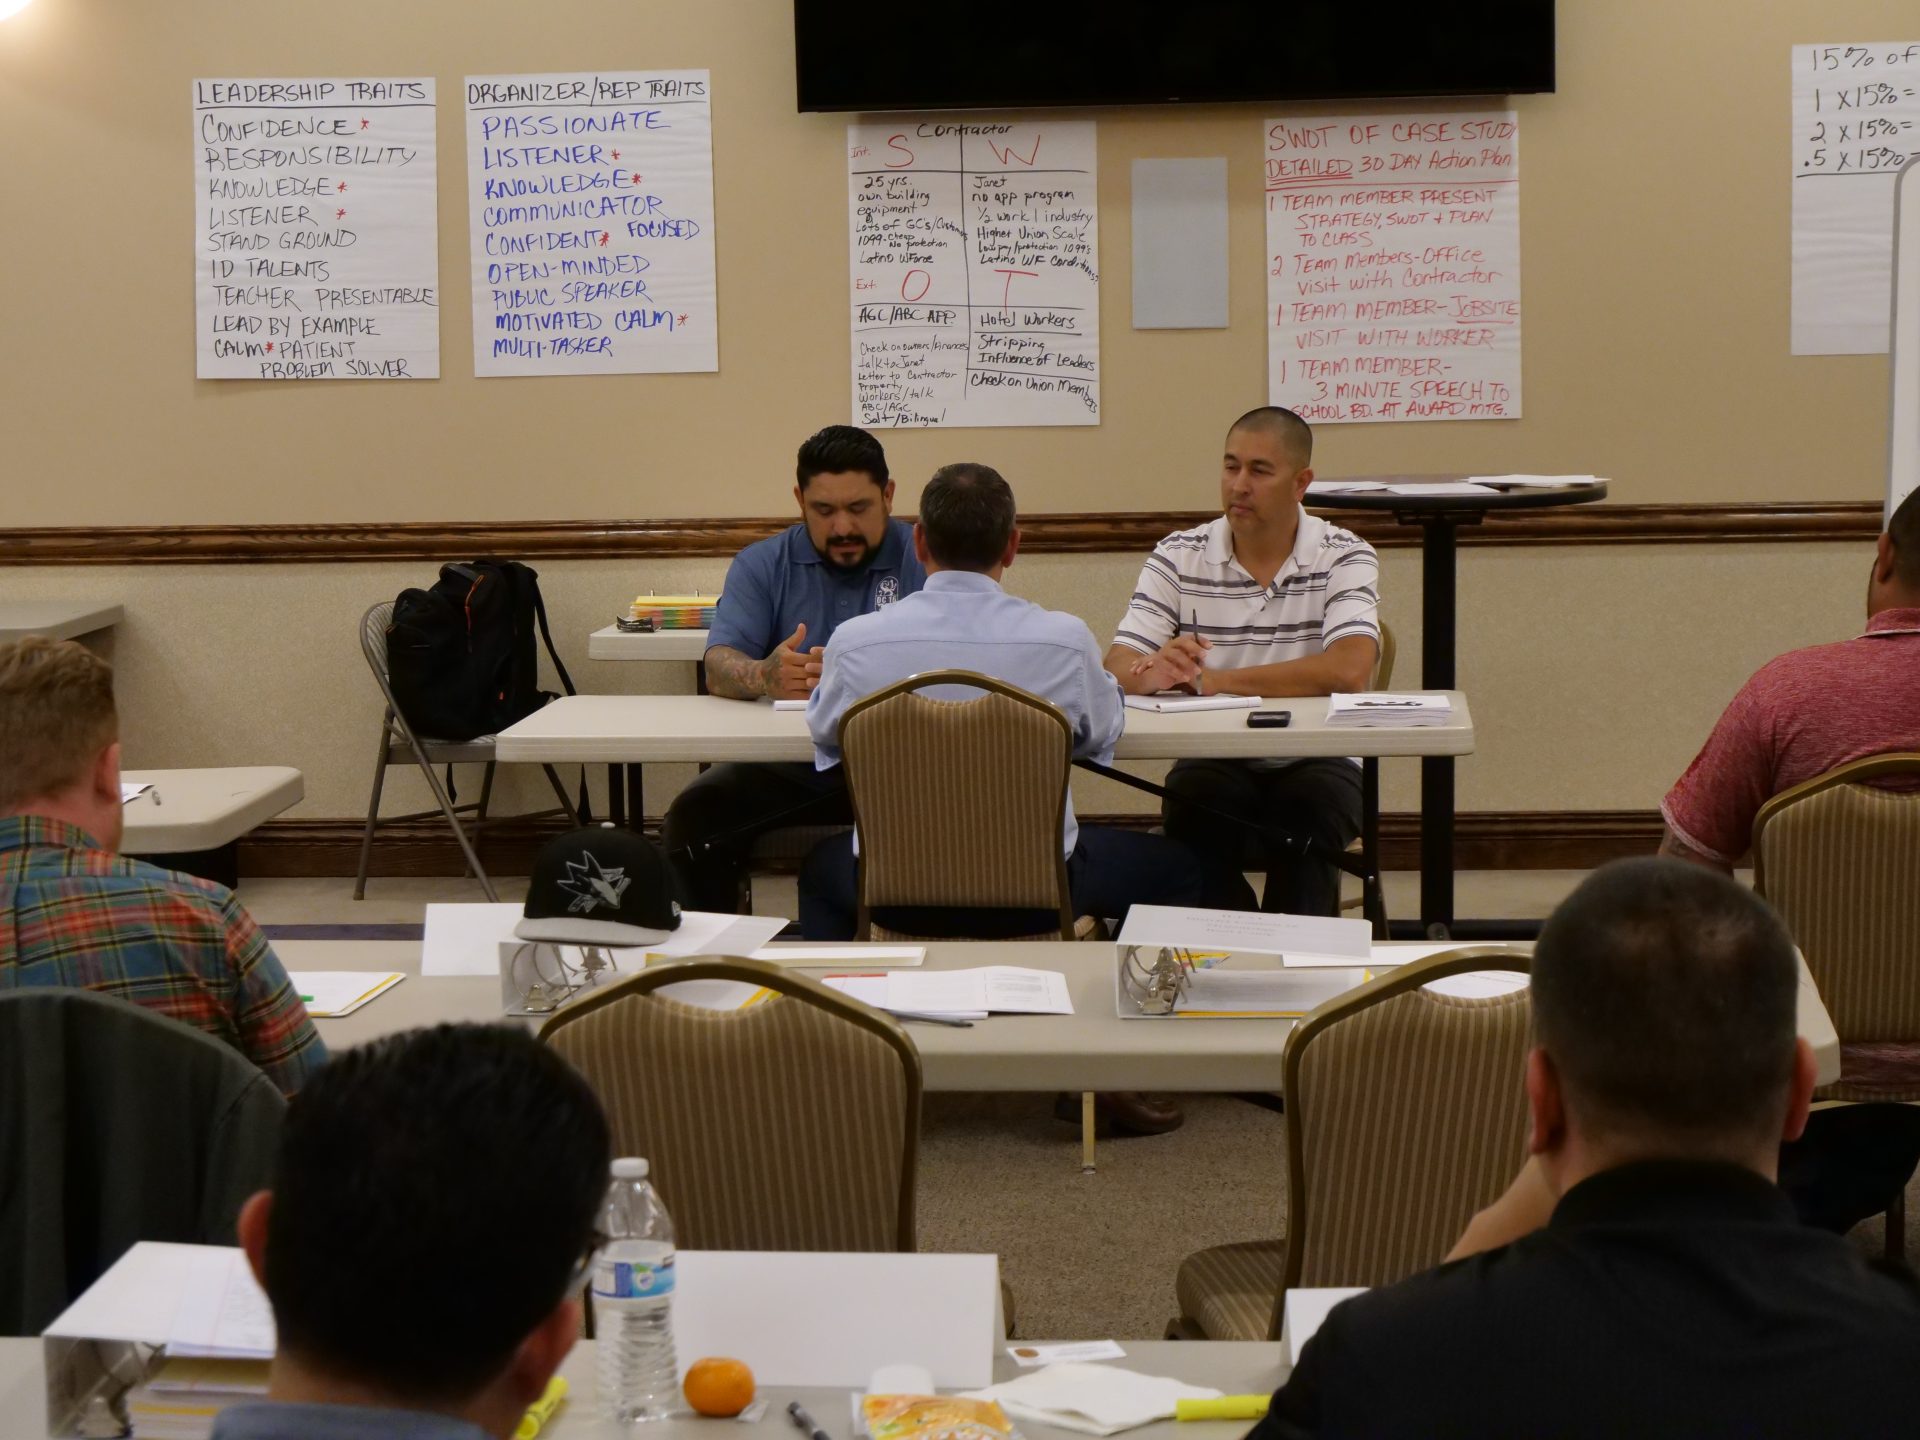 Image from the Gallery: Organizers Boot Camp – Livermore, CA